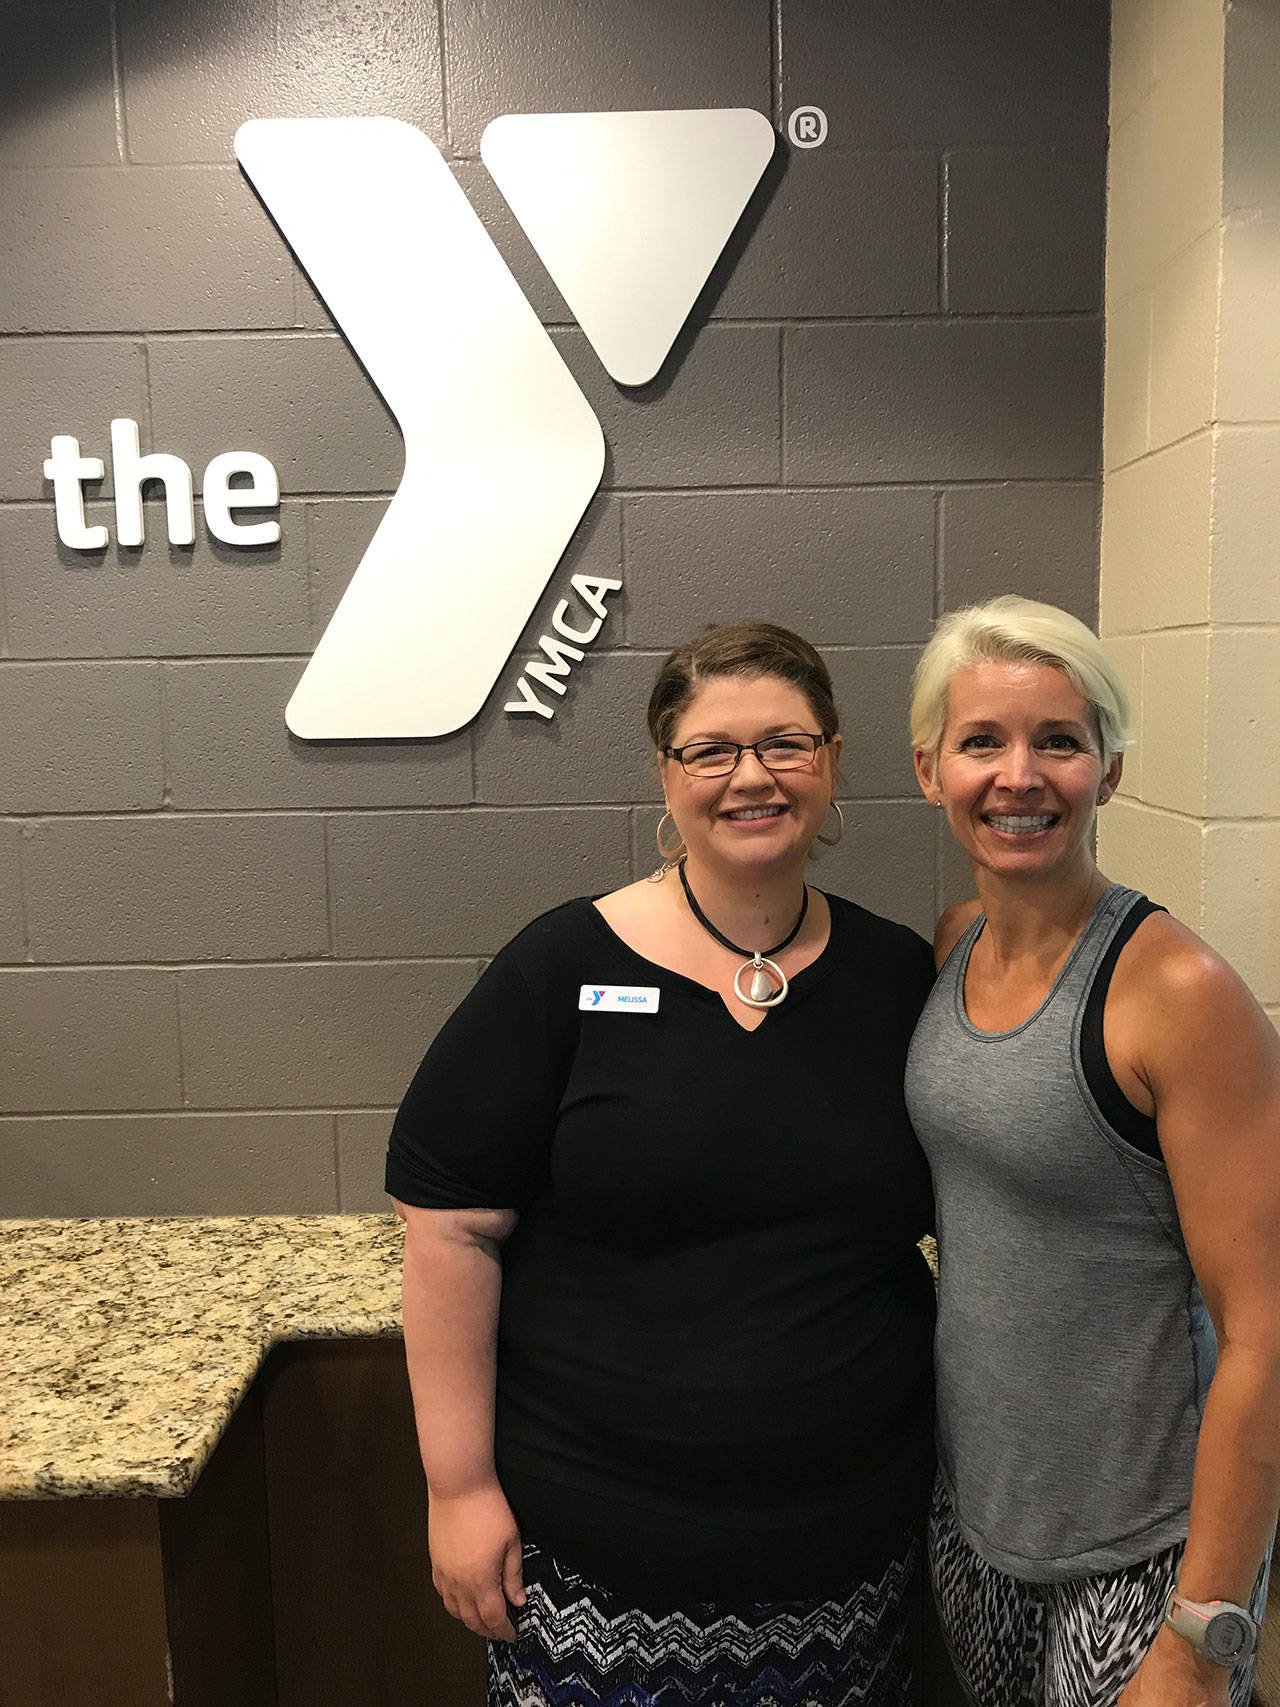 From left to right: Melissa Osterloo, Y member engagement director, and Jodi Milner, a Y fitness instructor, performed CPR and used an AED on a man in cardiac arrest, saving his life Monday. Photo courtesy of the Northshore YMCA